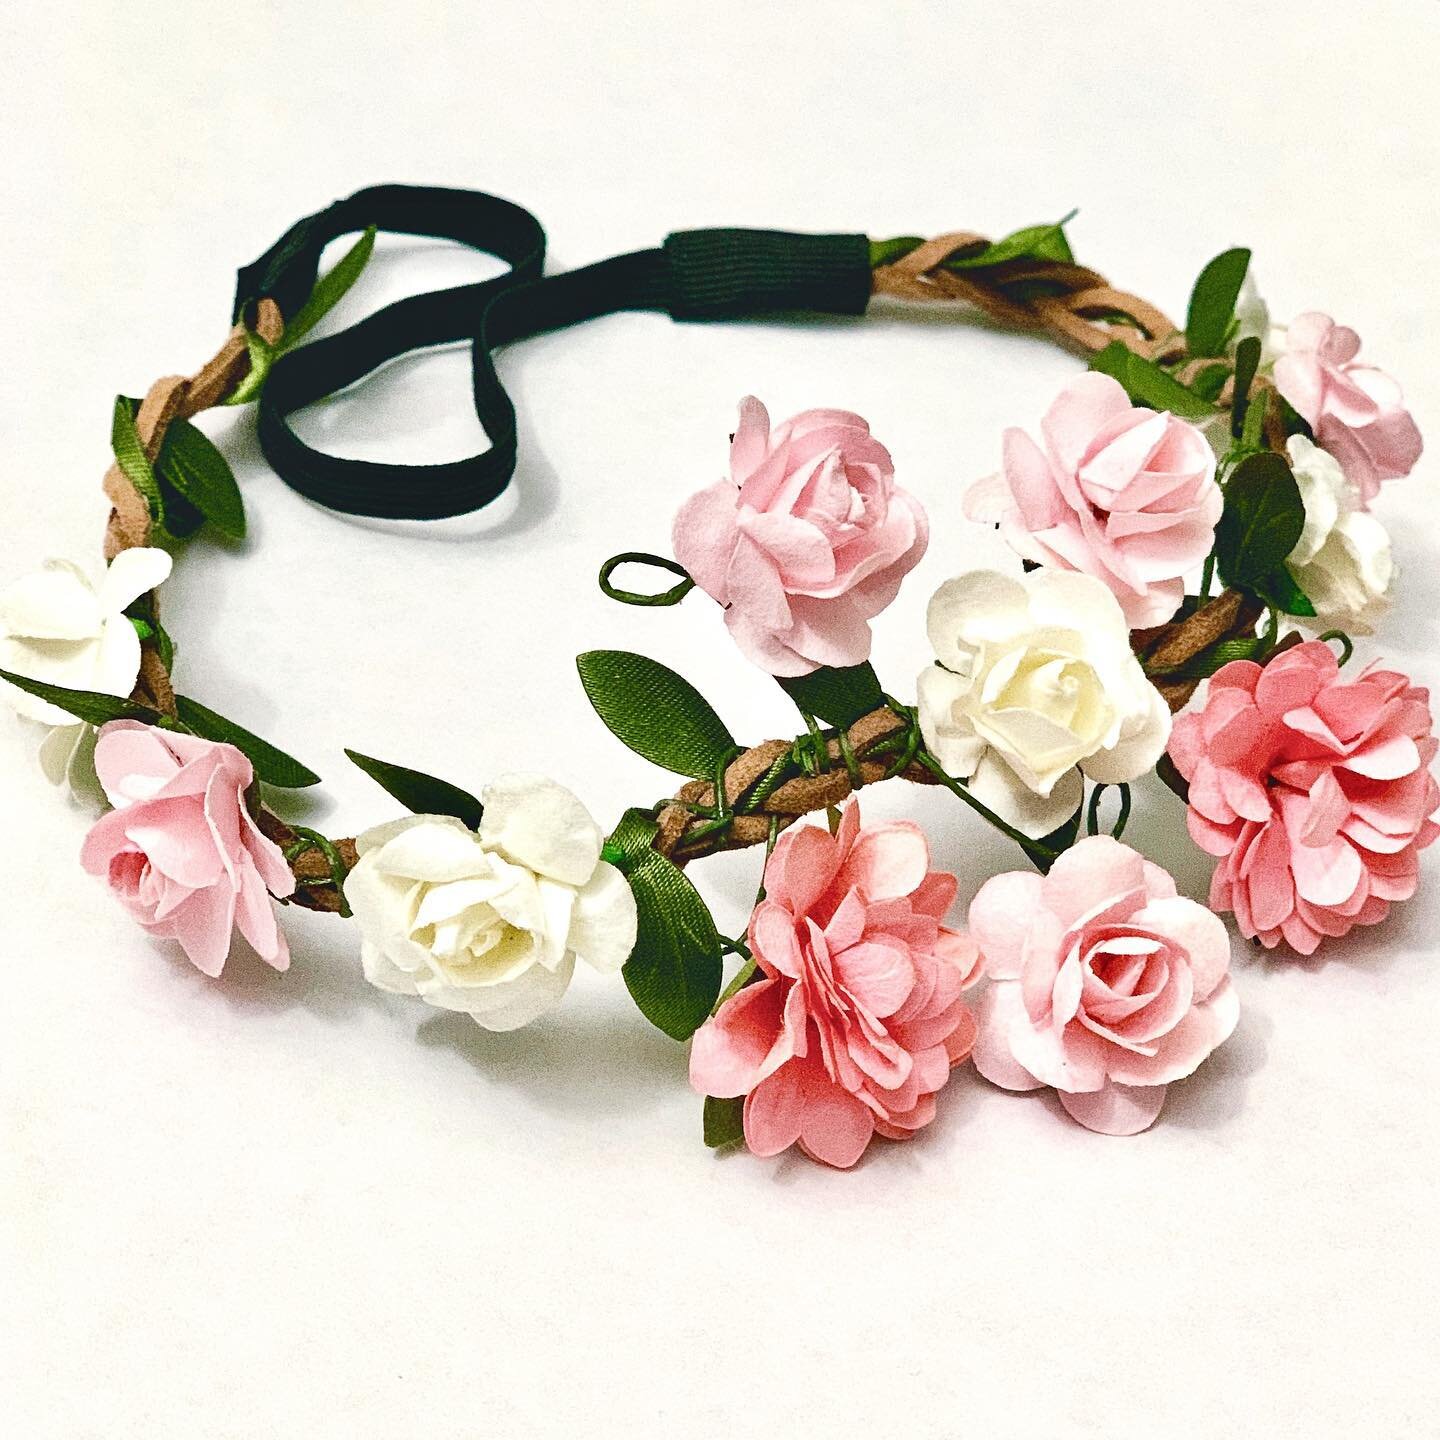 Romantic Pink Floral Crown 🌸 An affordable version of our popular rosette flower crown and just as lovely! Shop flowerchildhair.com 💗 Link in Profile!
#flowerchildhair #bridal #bridalaccessories